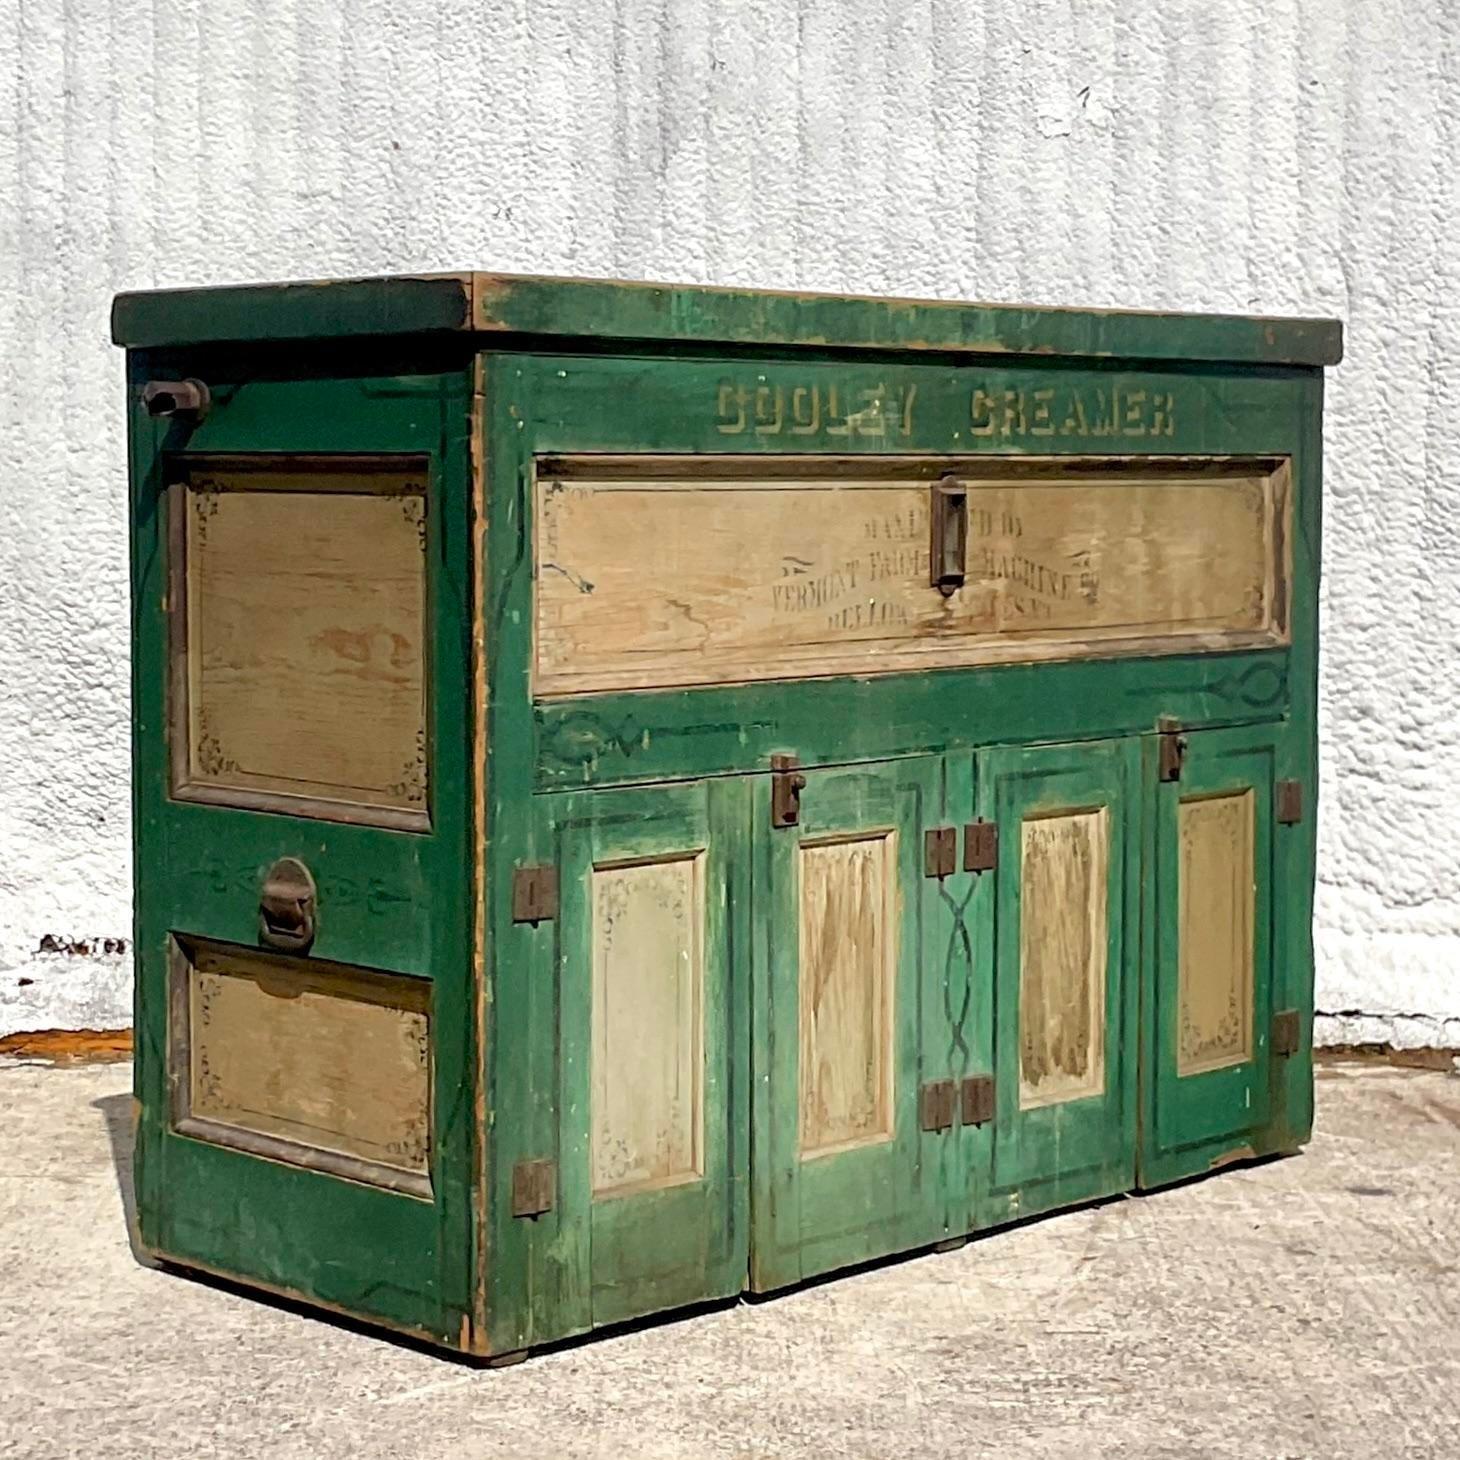 An extraordinary vintage Boho creamery cabinet. A real beauty from the iconic Philadelphia A.H.Reid creamery. Years of weathered patina with all the original tags still intact. Formerly a cooler, but would be a great storage unit today. Perfect as a